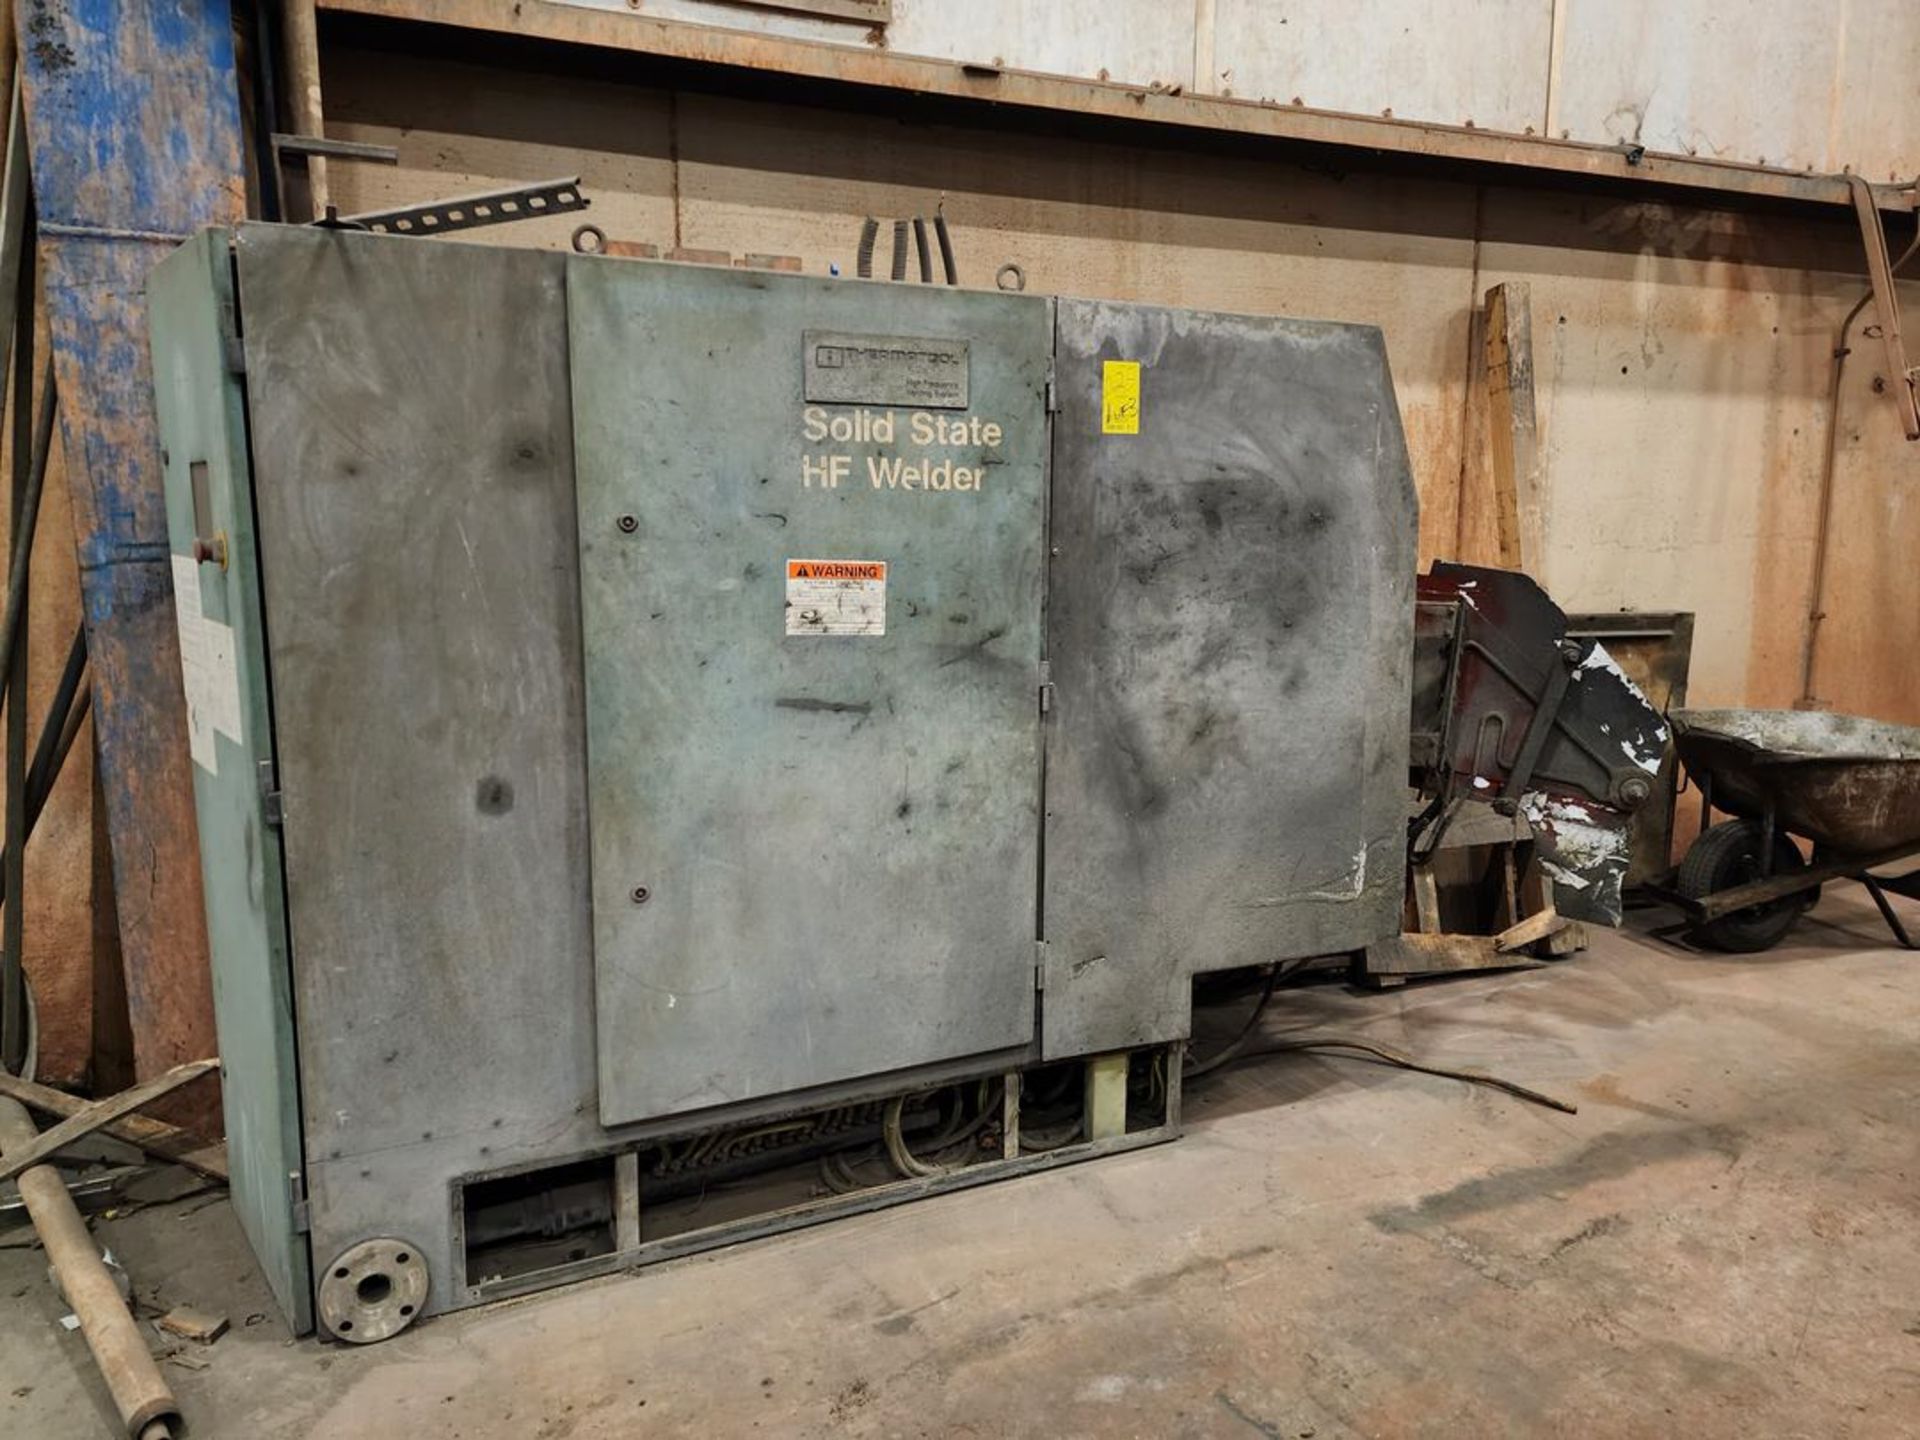 Thermatool Solid State HF Welder (Parts Only) (No Tag); W/ Power Supply Unit